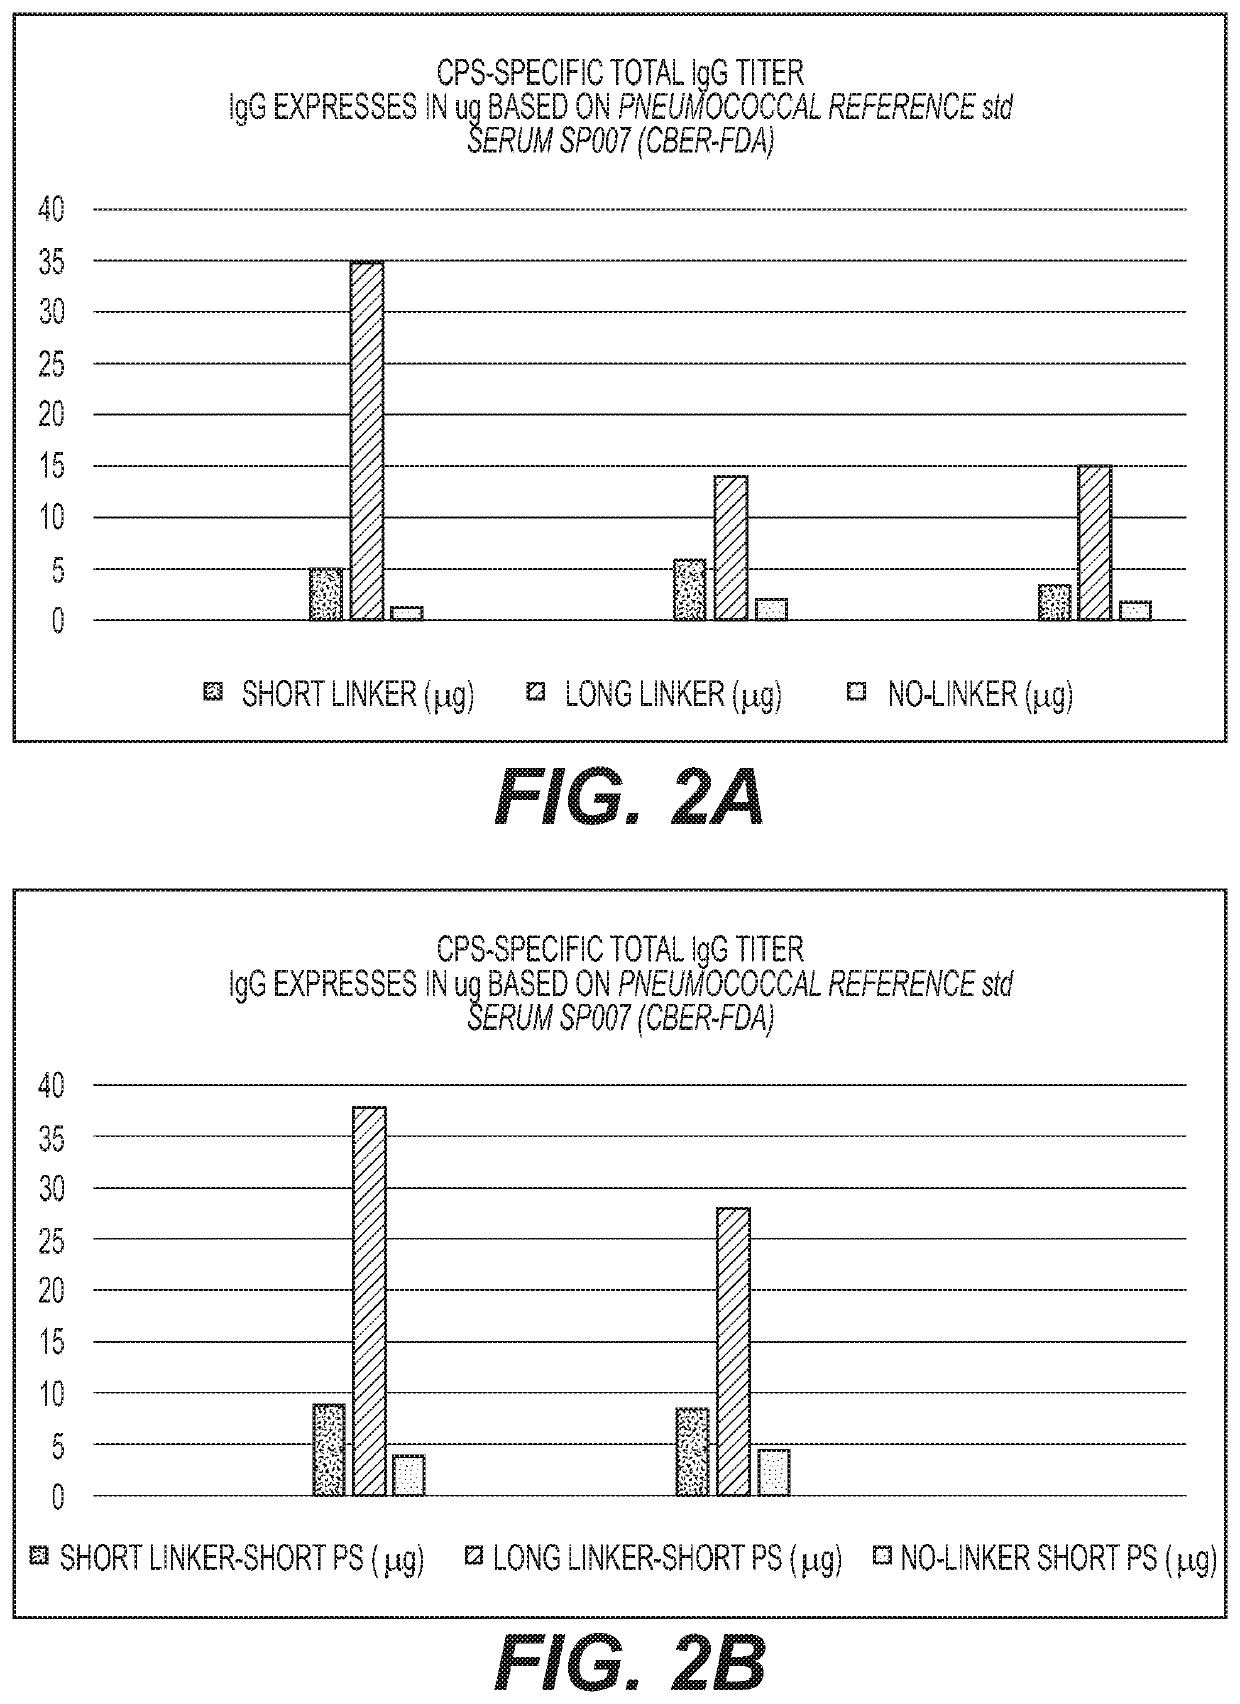 Multivalent conjugate vaccines with bivalent or multivalent conjugate polysaccharides that provide improved immunogenicity and avidity